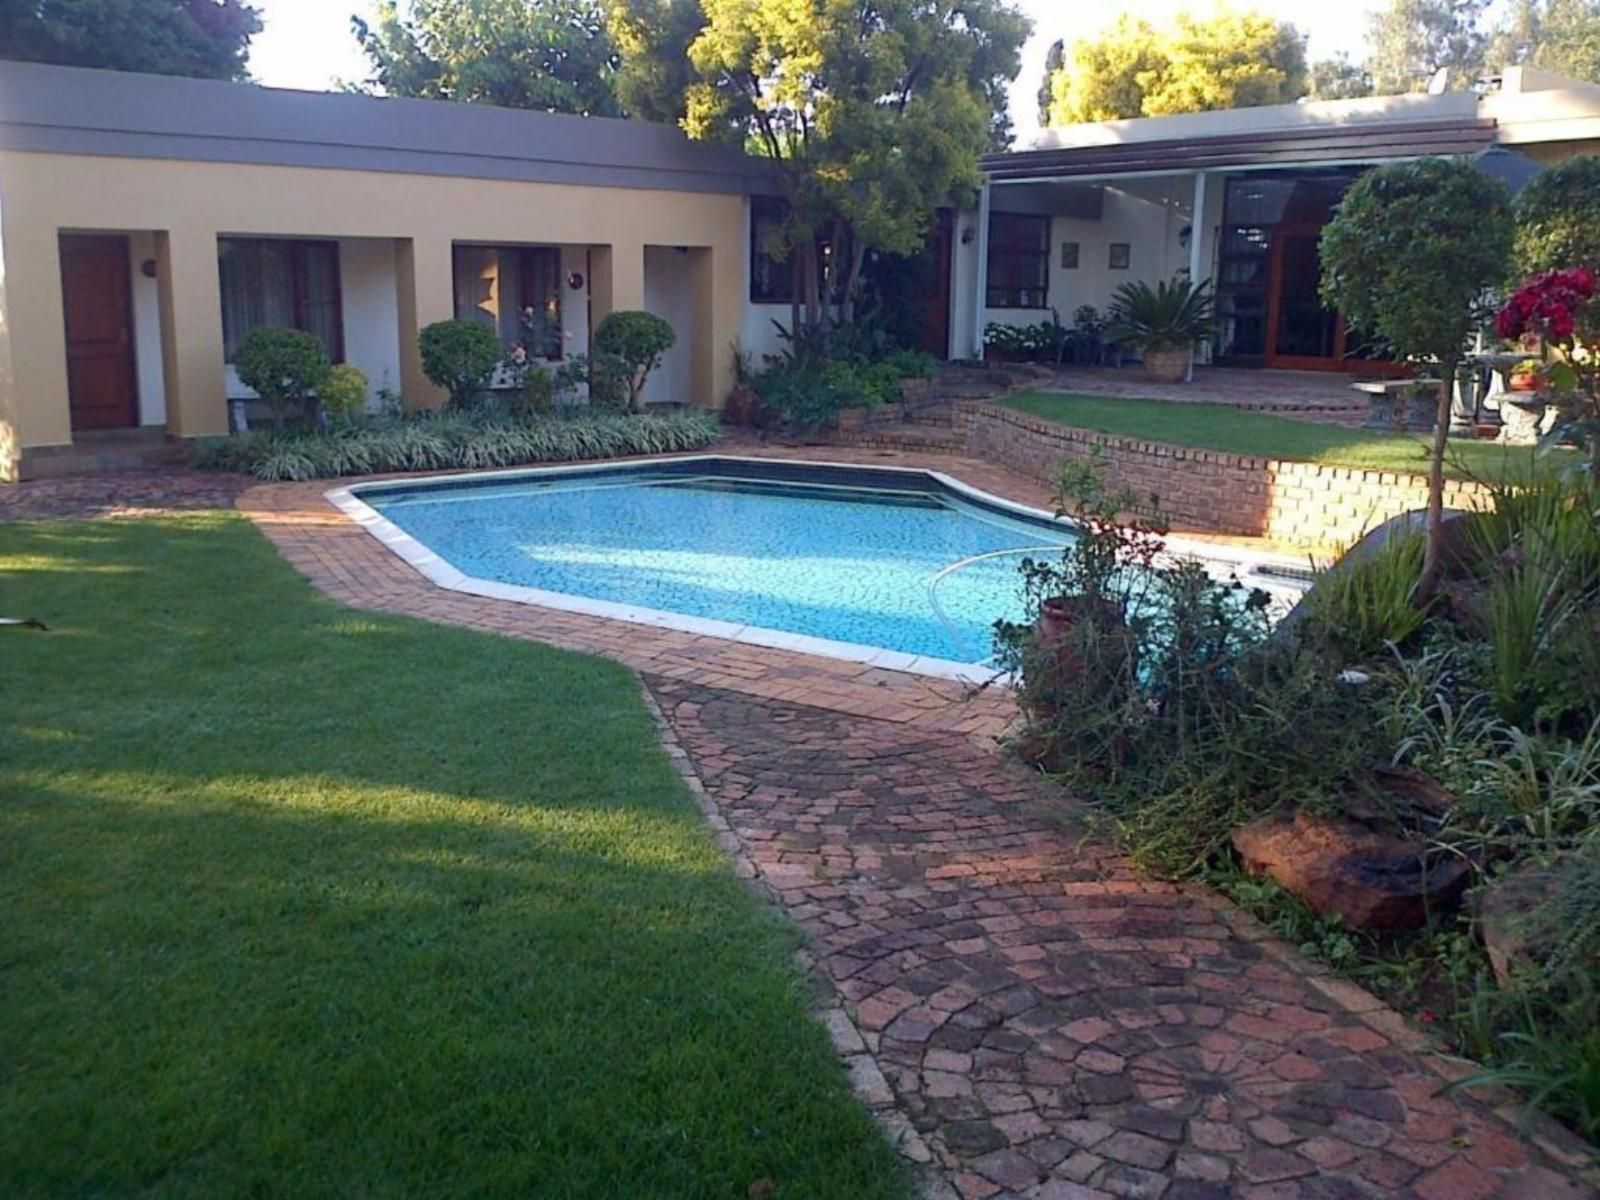 Jubilee Lodge Northcliff Johannesburg Gauteng South Africa House, Building, Architecture, Palm Tree, Plant, Nature, Wood, Garden, Swimming Pool